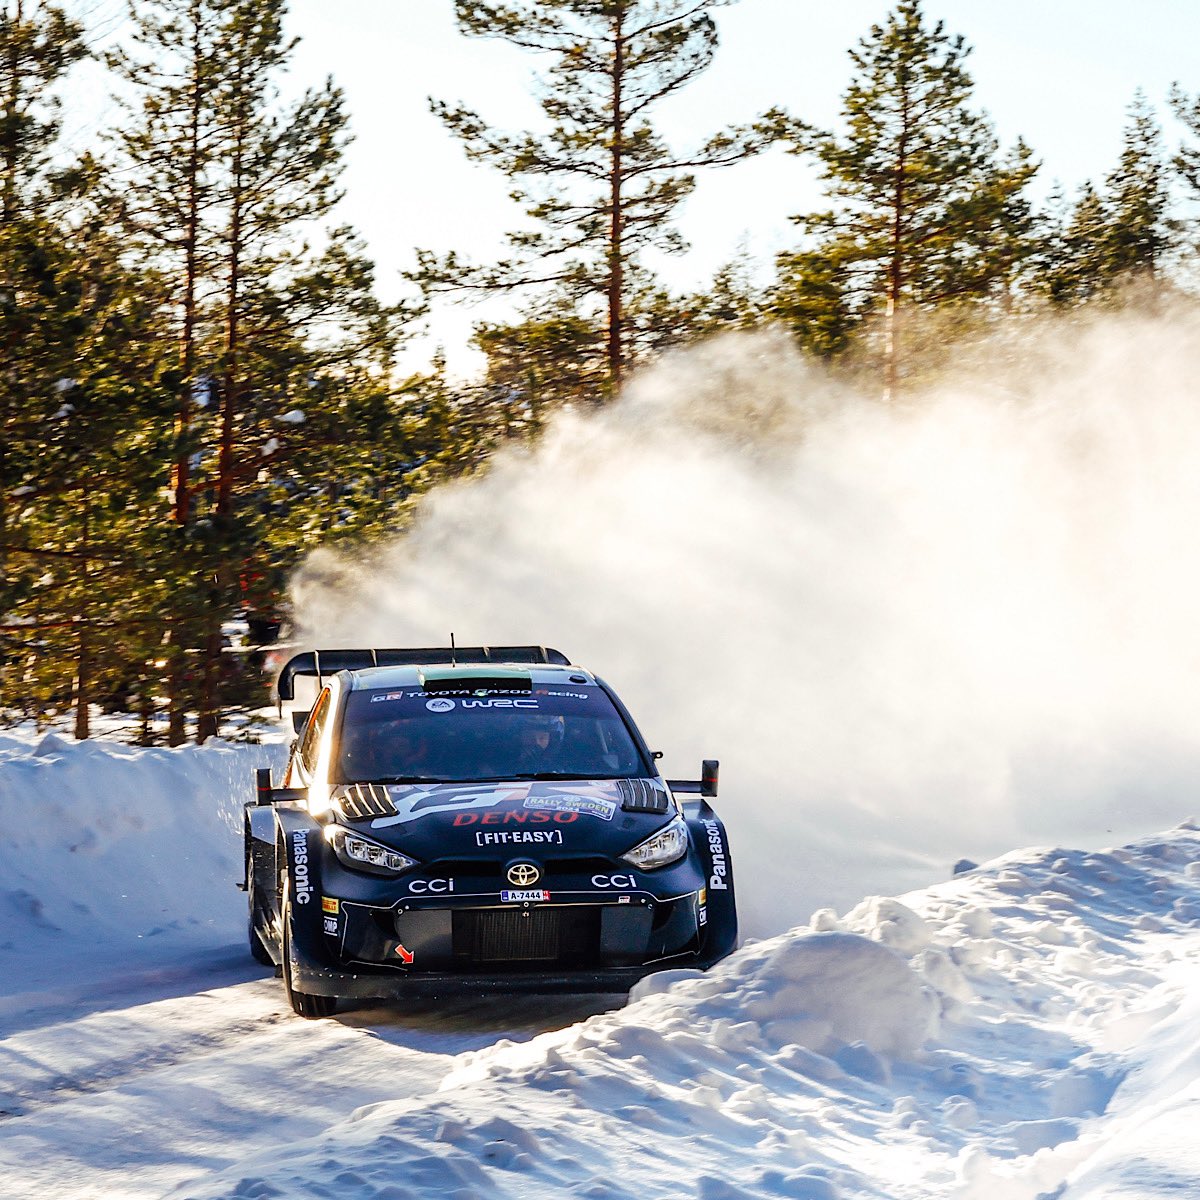 It’s 2nd overall, fastest on Super Sunday and 2nd in the Power Stage for @ElfynEvans and @scottmartinat in Sweden! 💪 A great points haul for the championship after having to snow plough on Friday 👏 #ToyotaGAZOORacing #GRYaris #WRC #RallySweden 🇸🇪